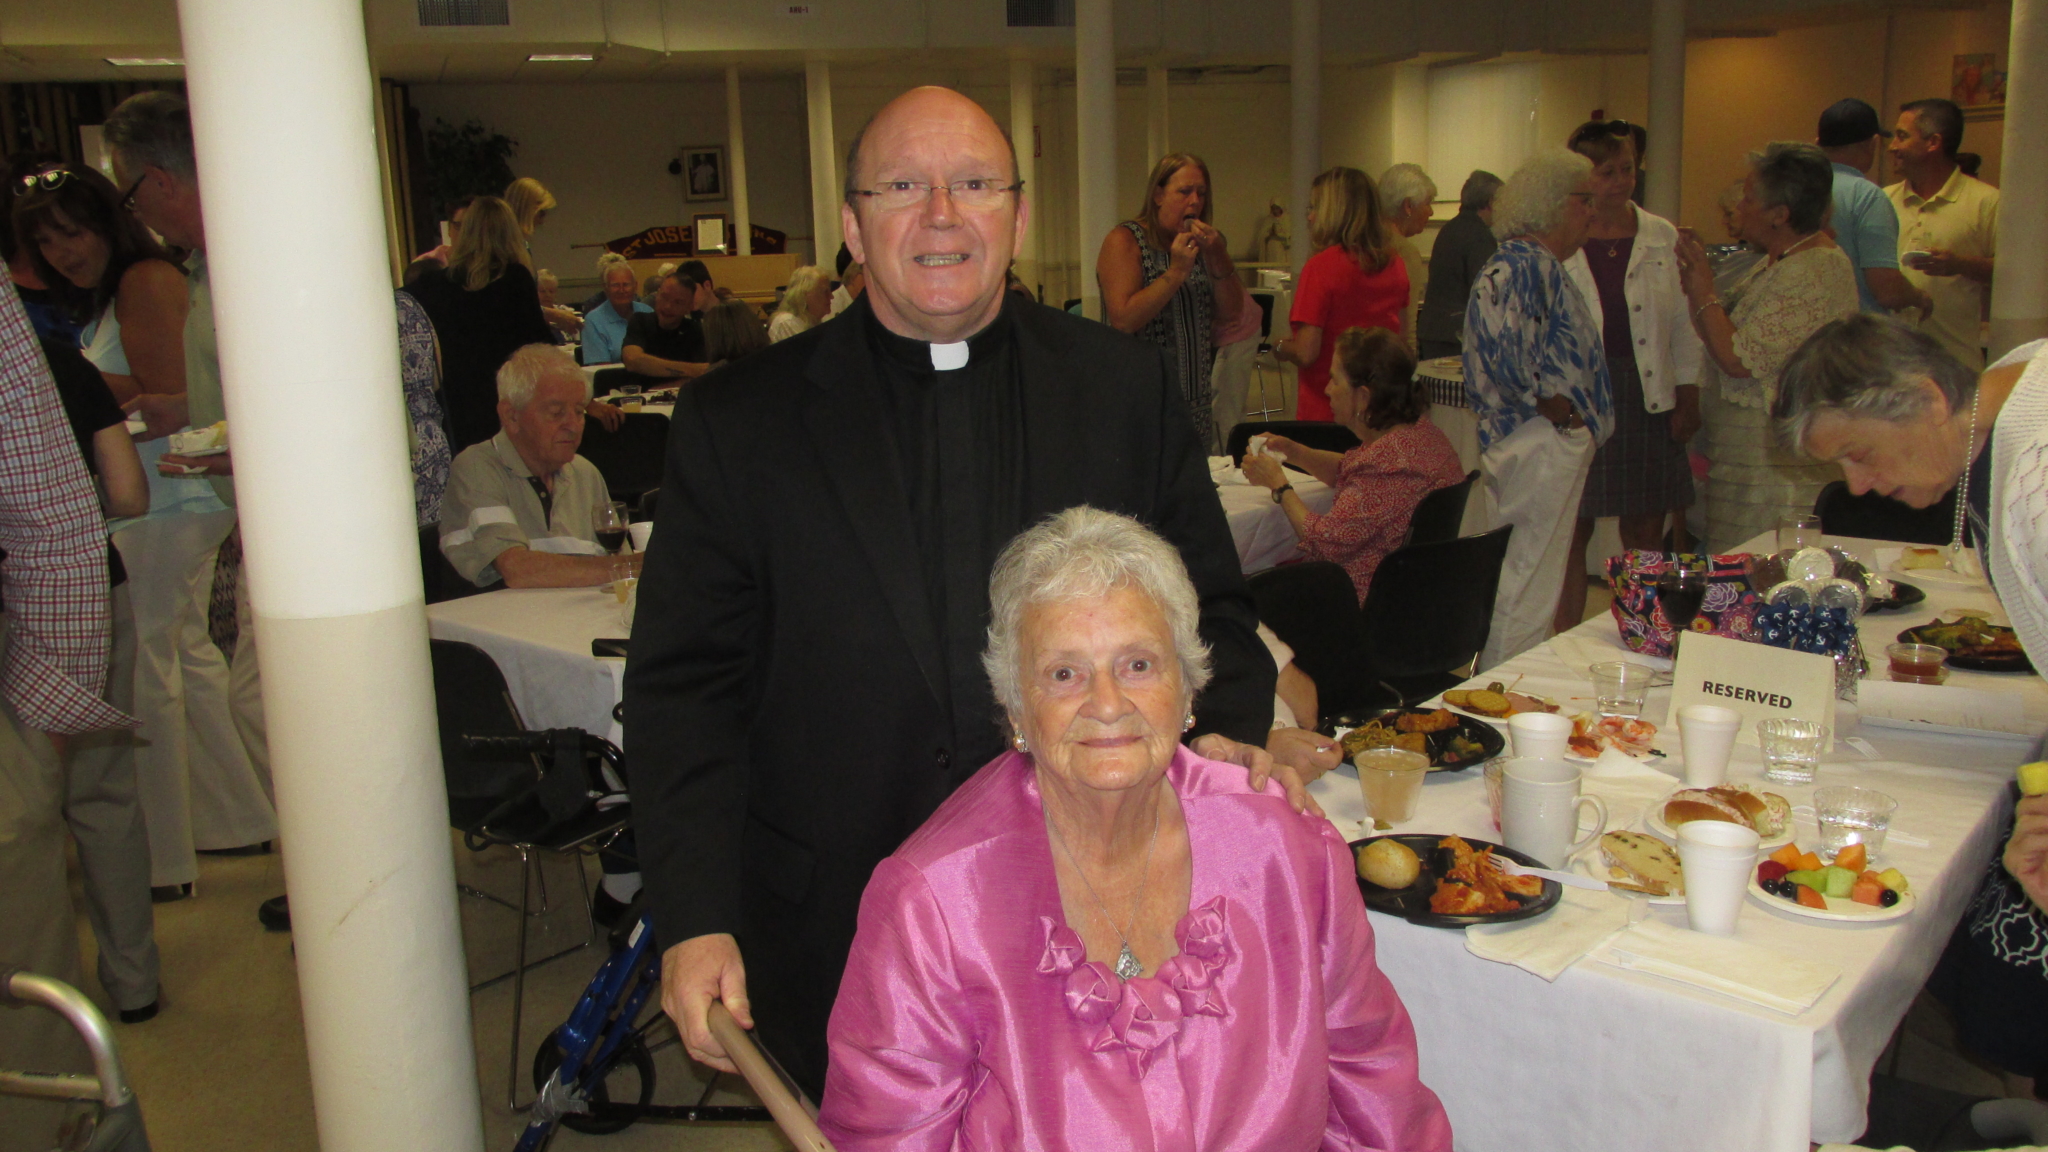 Fr. Joe White with his (very) proud mother, Kay White, 93 years old, at his 25th Anniversary Celebration.